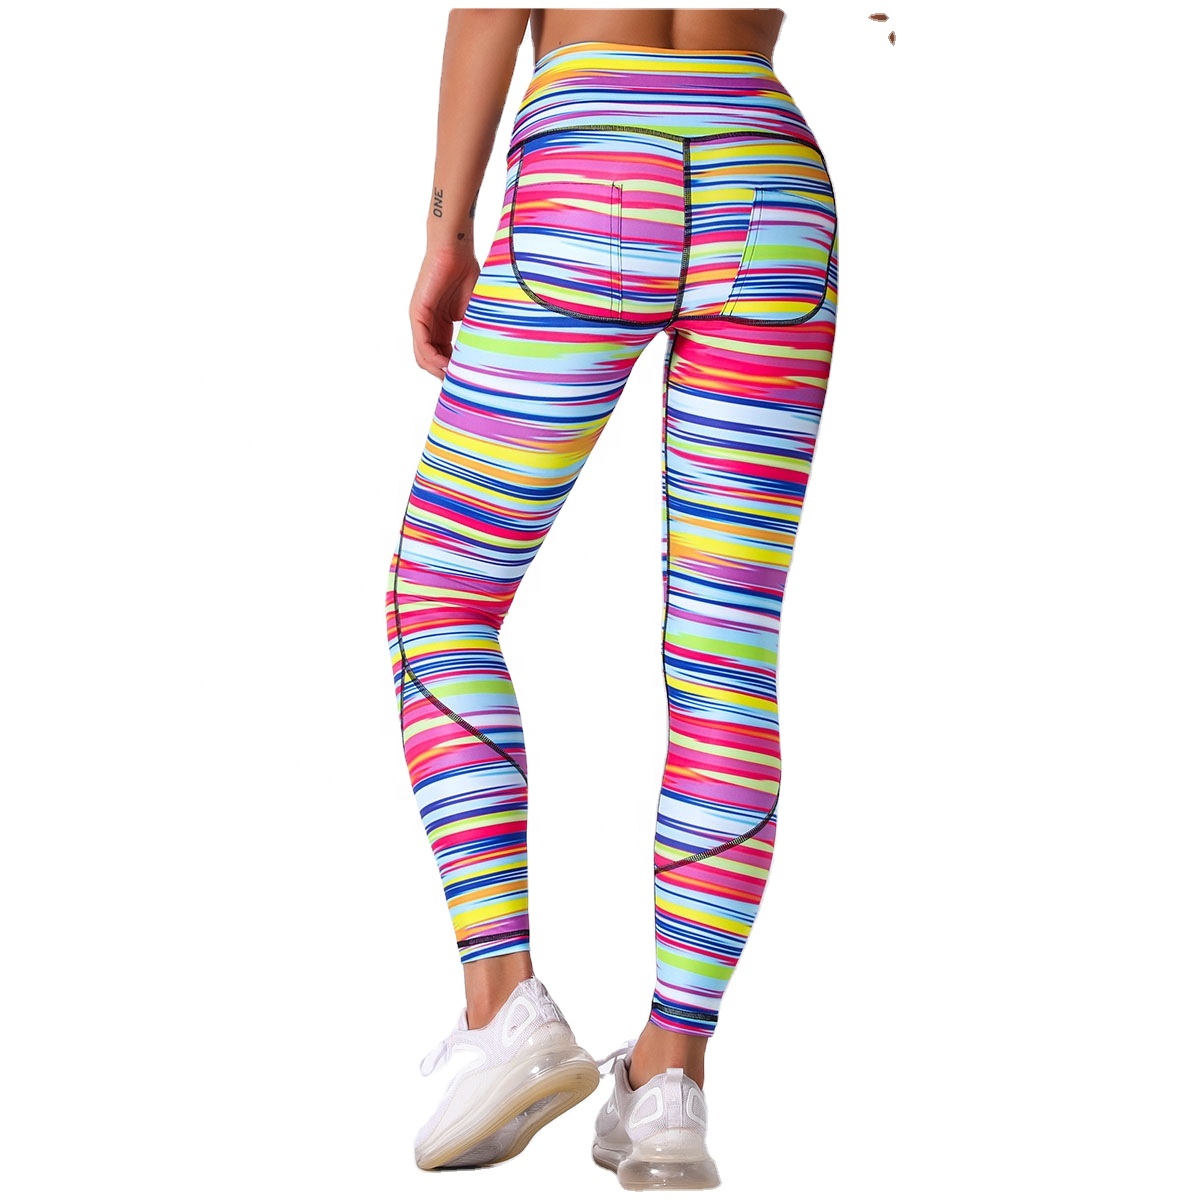 Personlized Products High Support Sports Bra -
 Slim Leggings New Style Tight Yoga Pants High Waist Printed Sports Fitness Recycled Breathable Seamless – Westfox